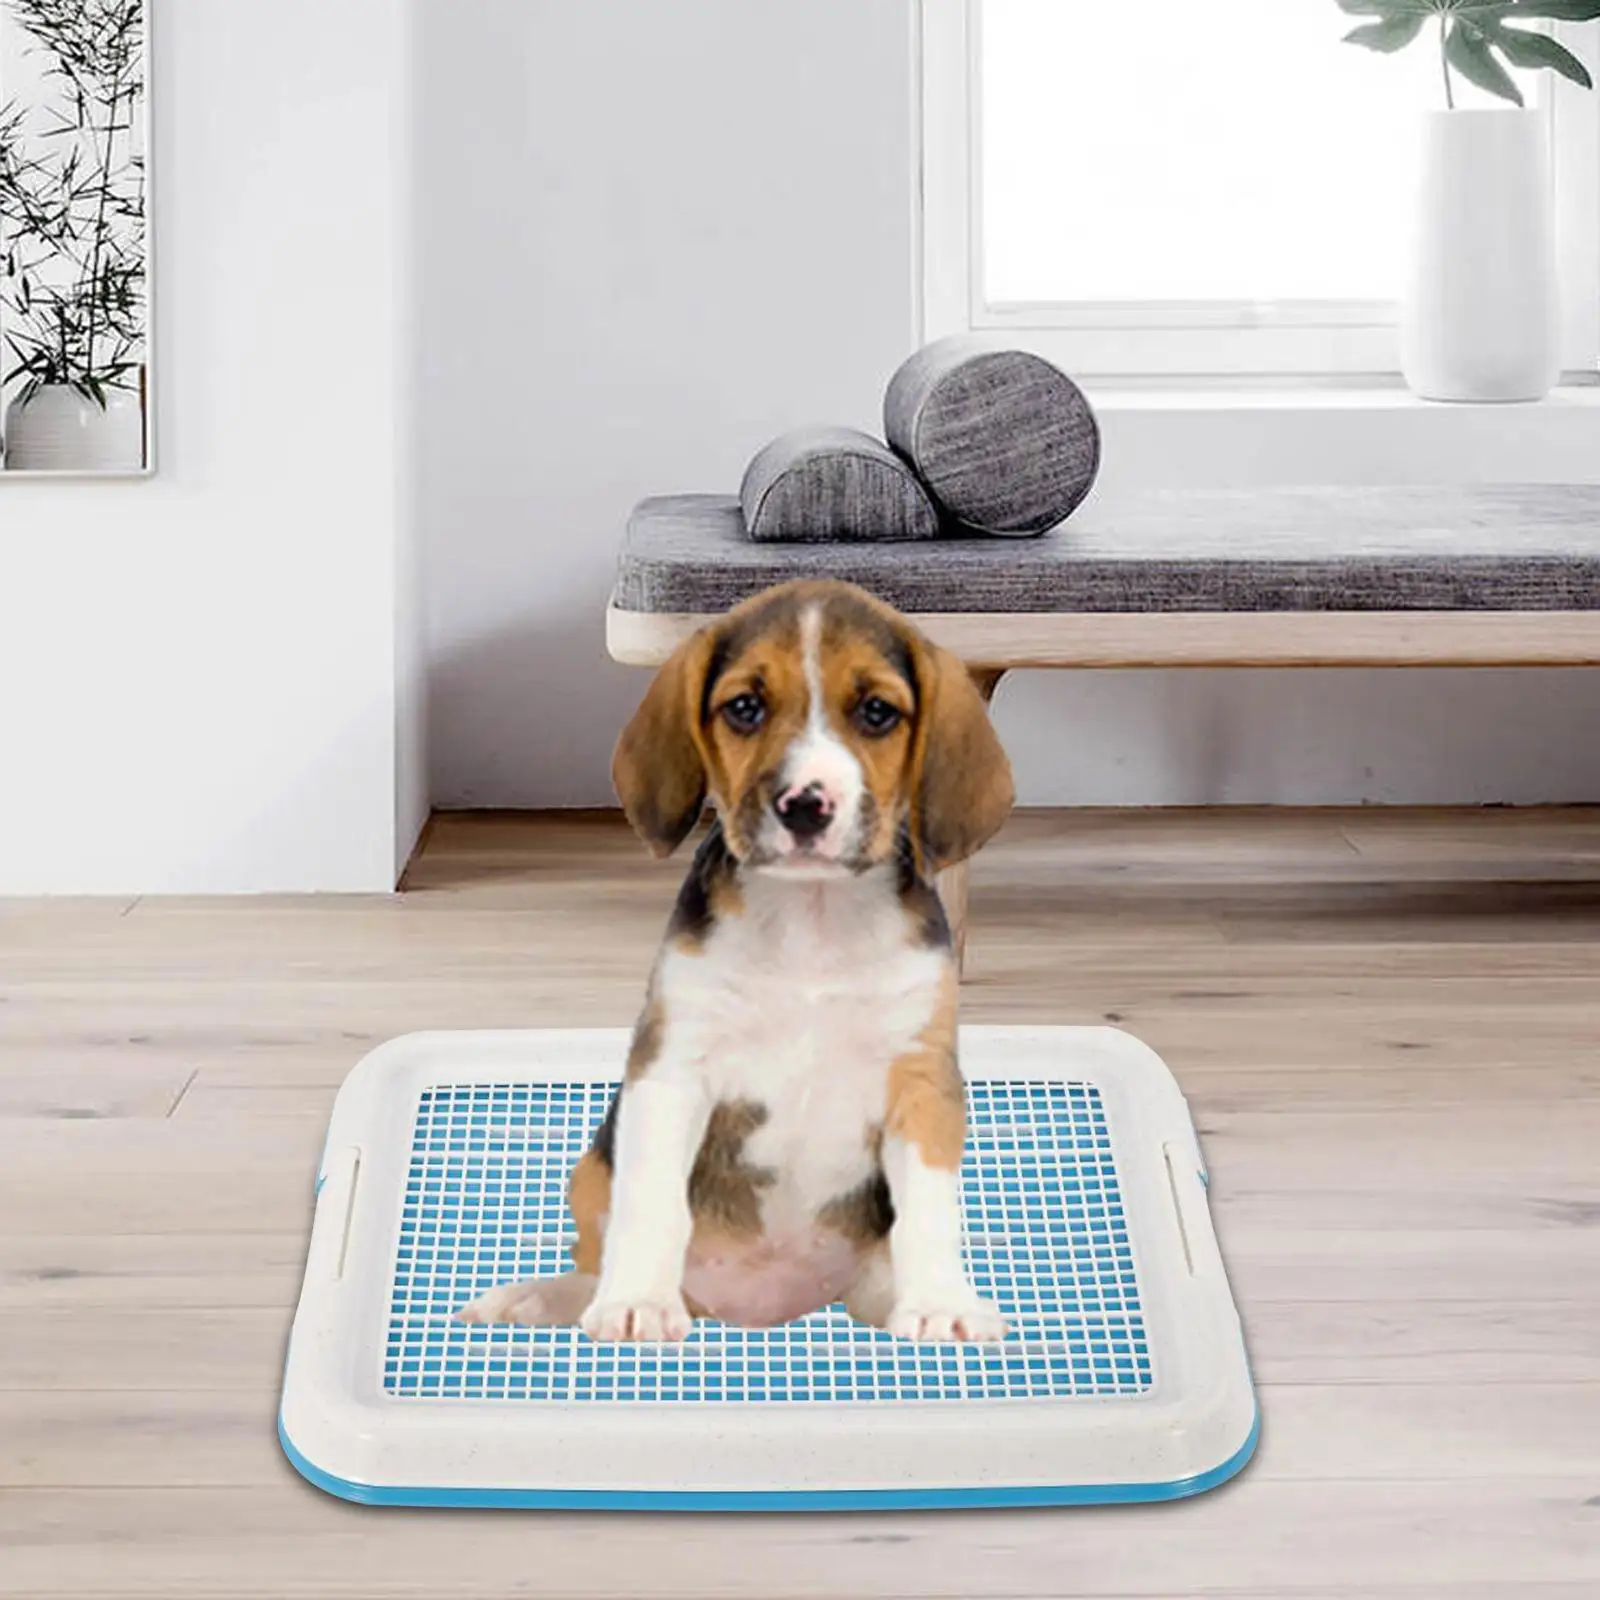 Dog Potty Toilet Training Tray Indoor Easy to Clean Puppy Pee Pad Holder Mesh Potty Training Tray for Puppies Small Size Dogs